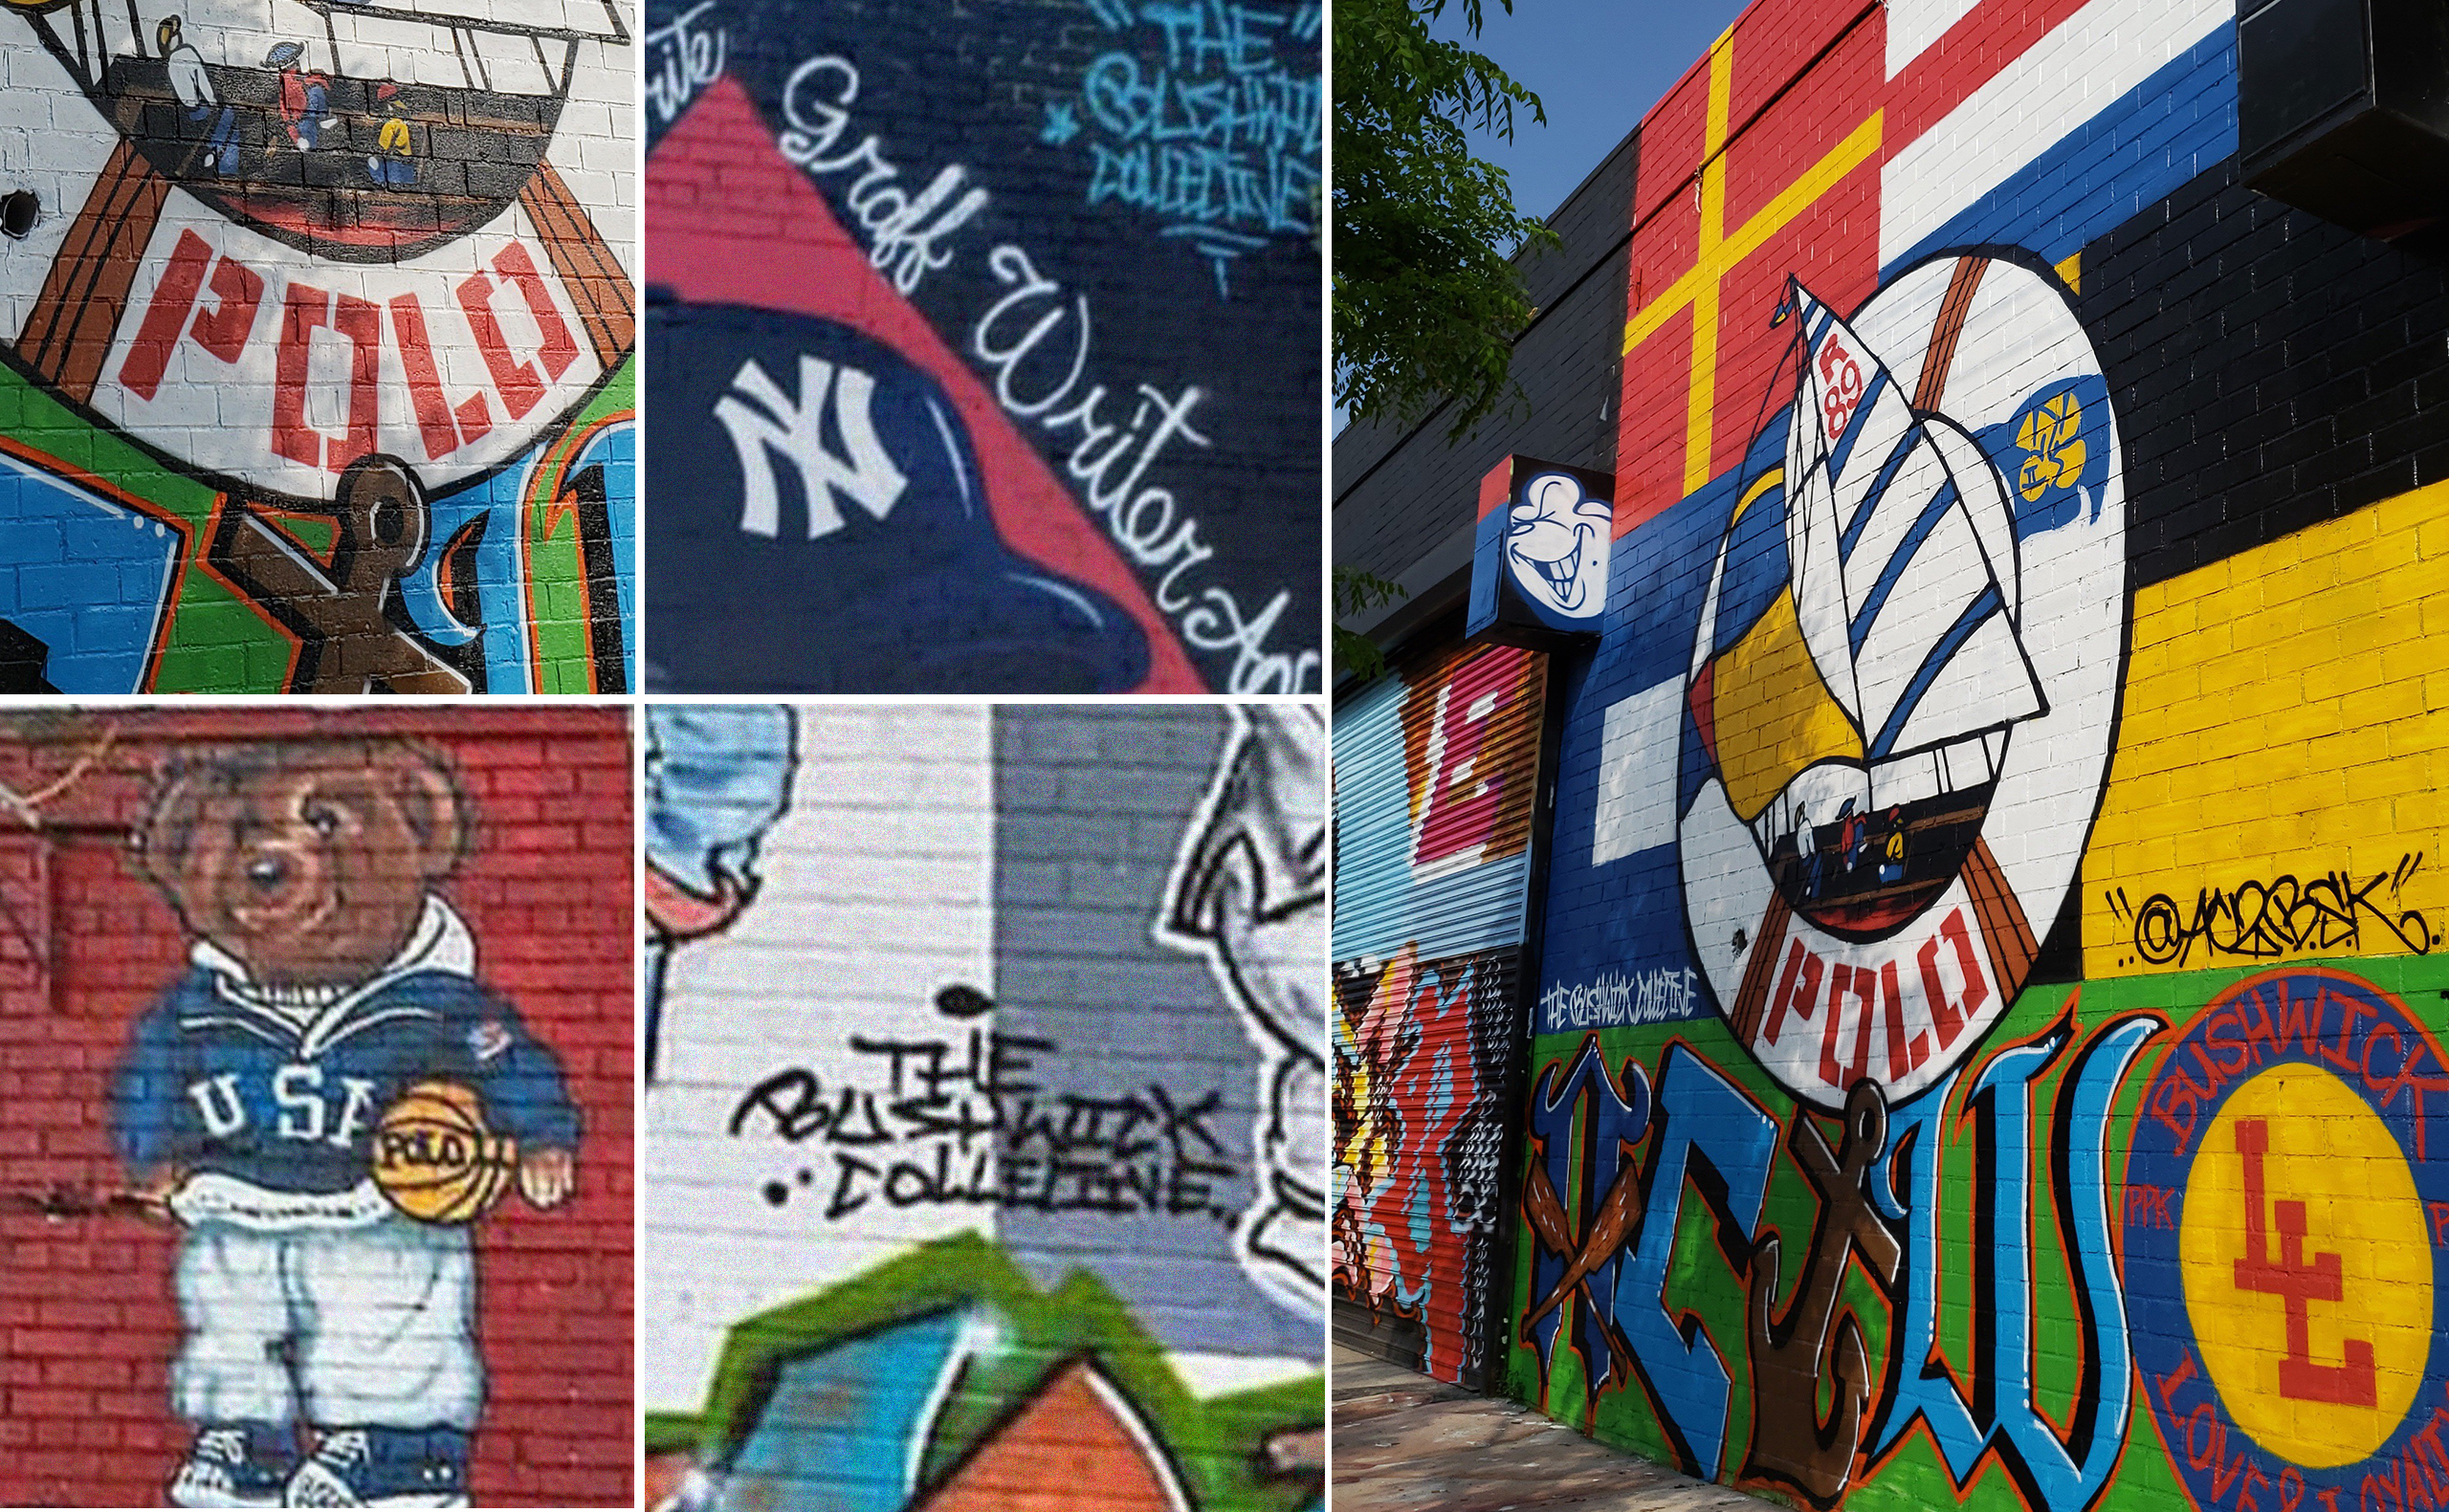 A survey of AC2BSK’s Polo-inspired murals, which he began painting in 2015